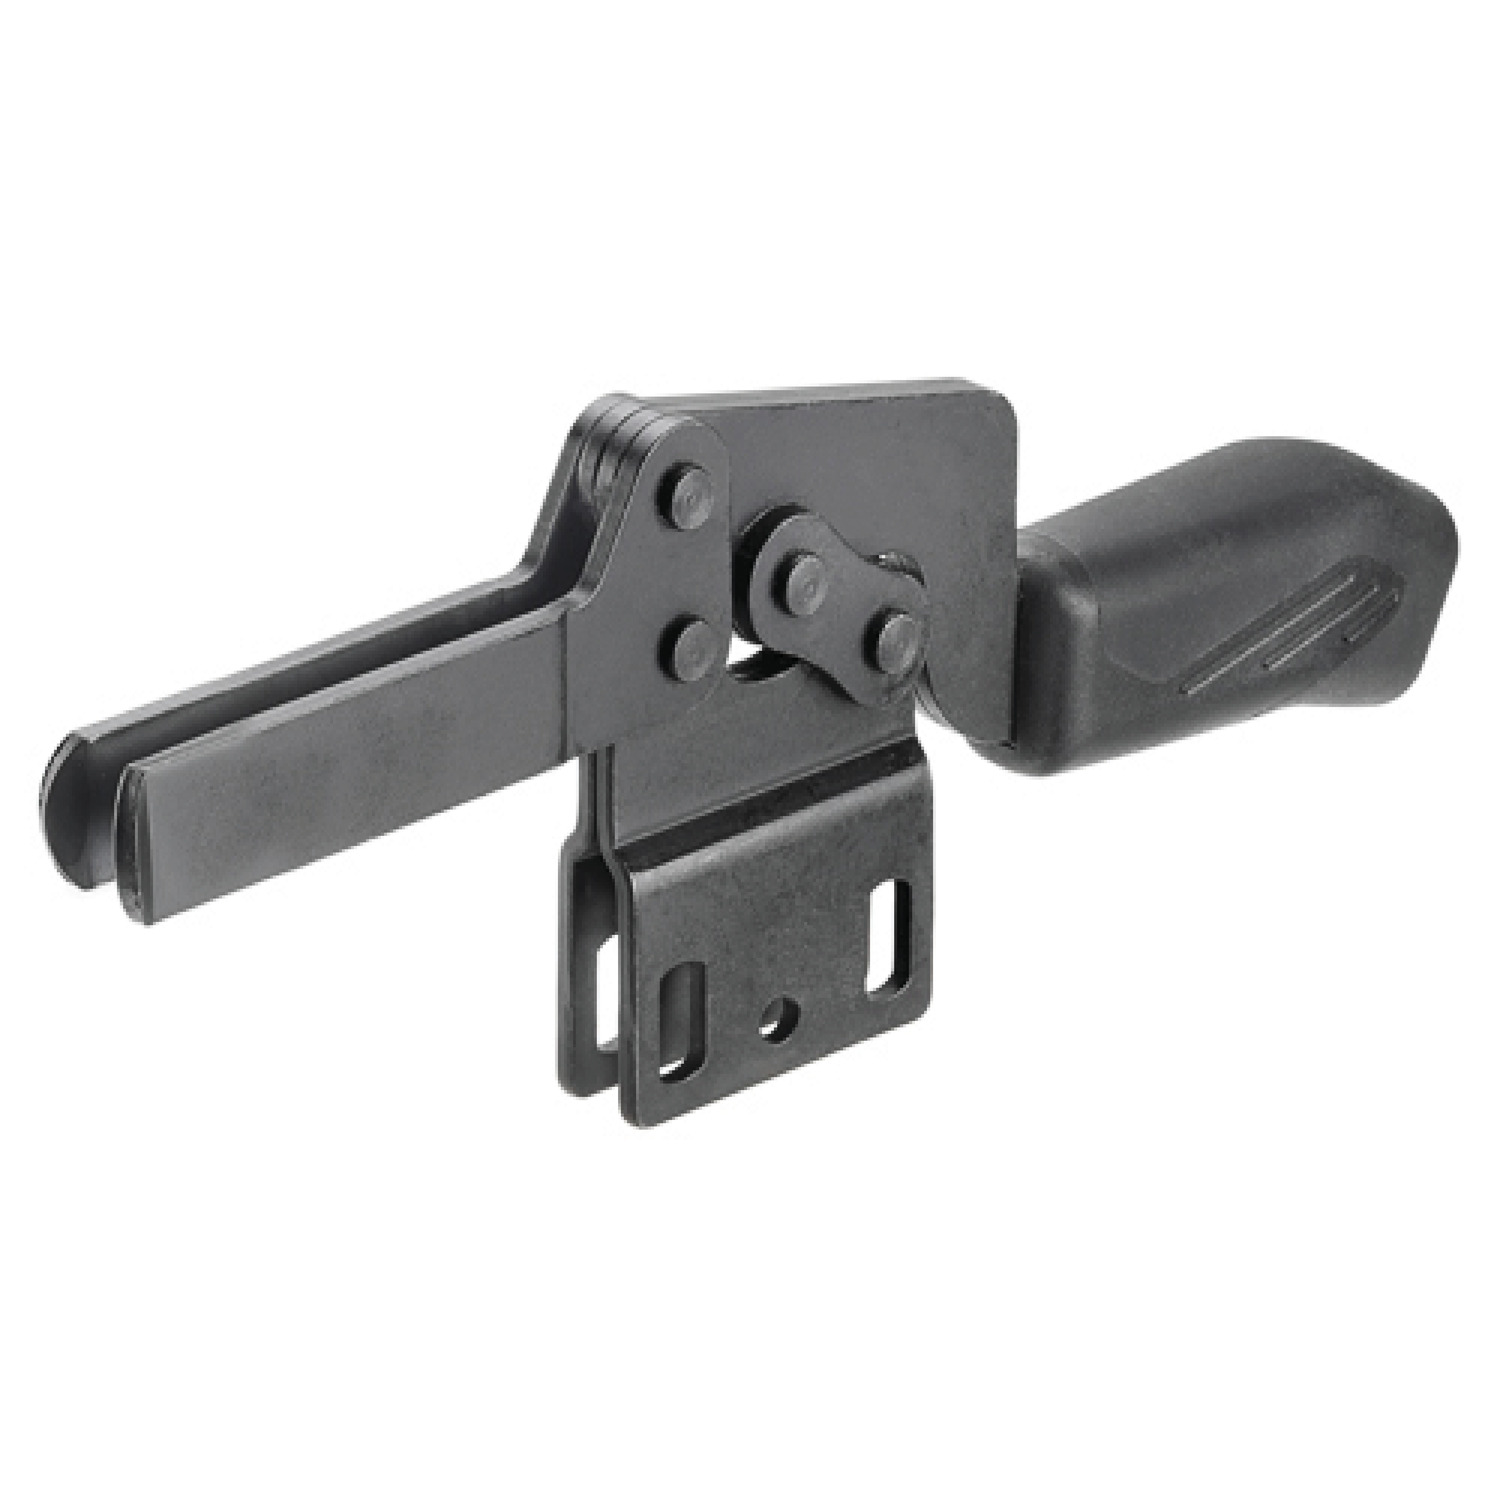 Product 41062.1, Horizontal Acting Toggle Clamps black - open arm - vertical base / 